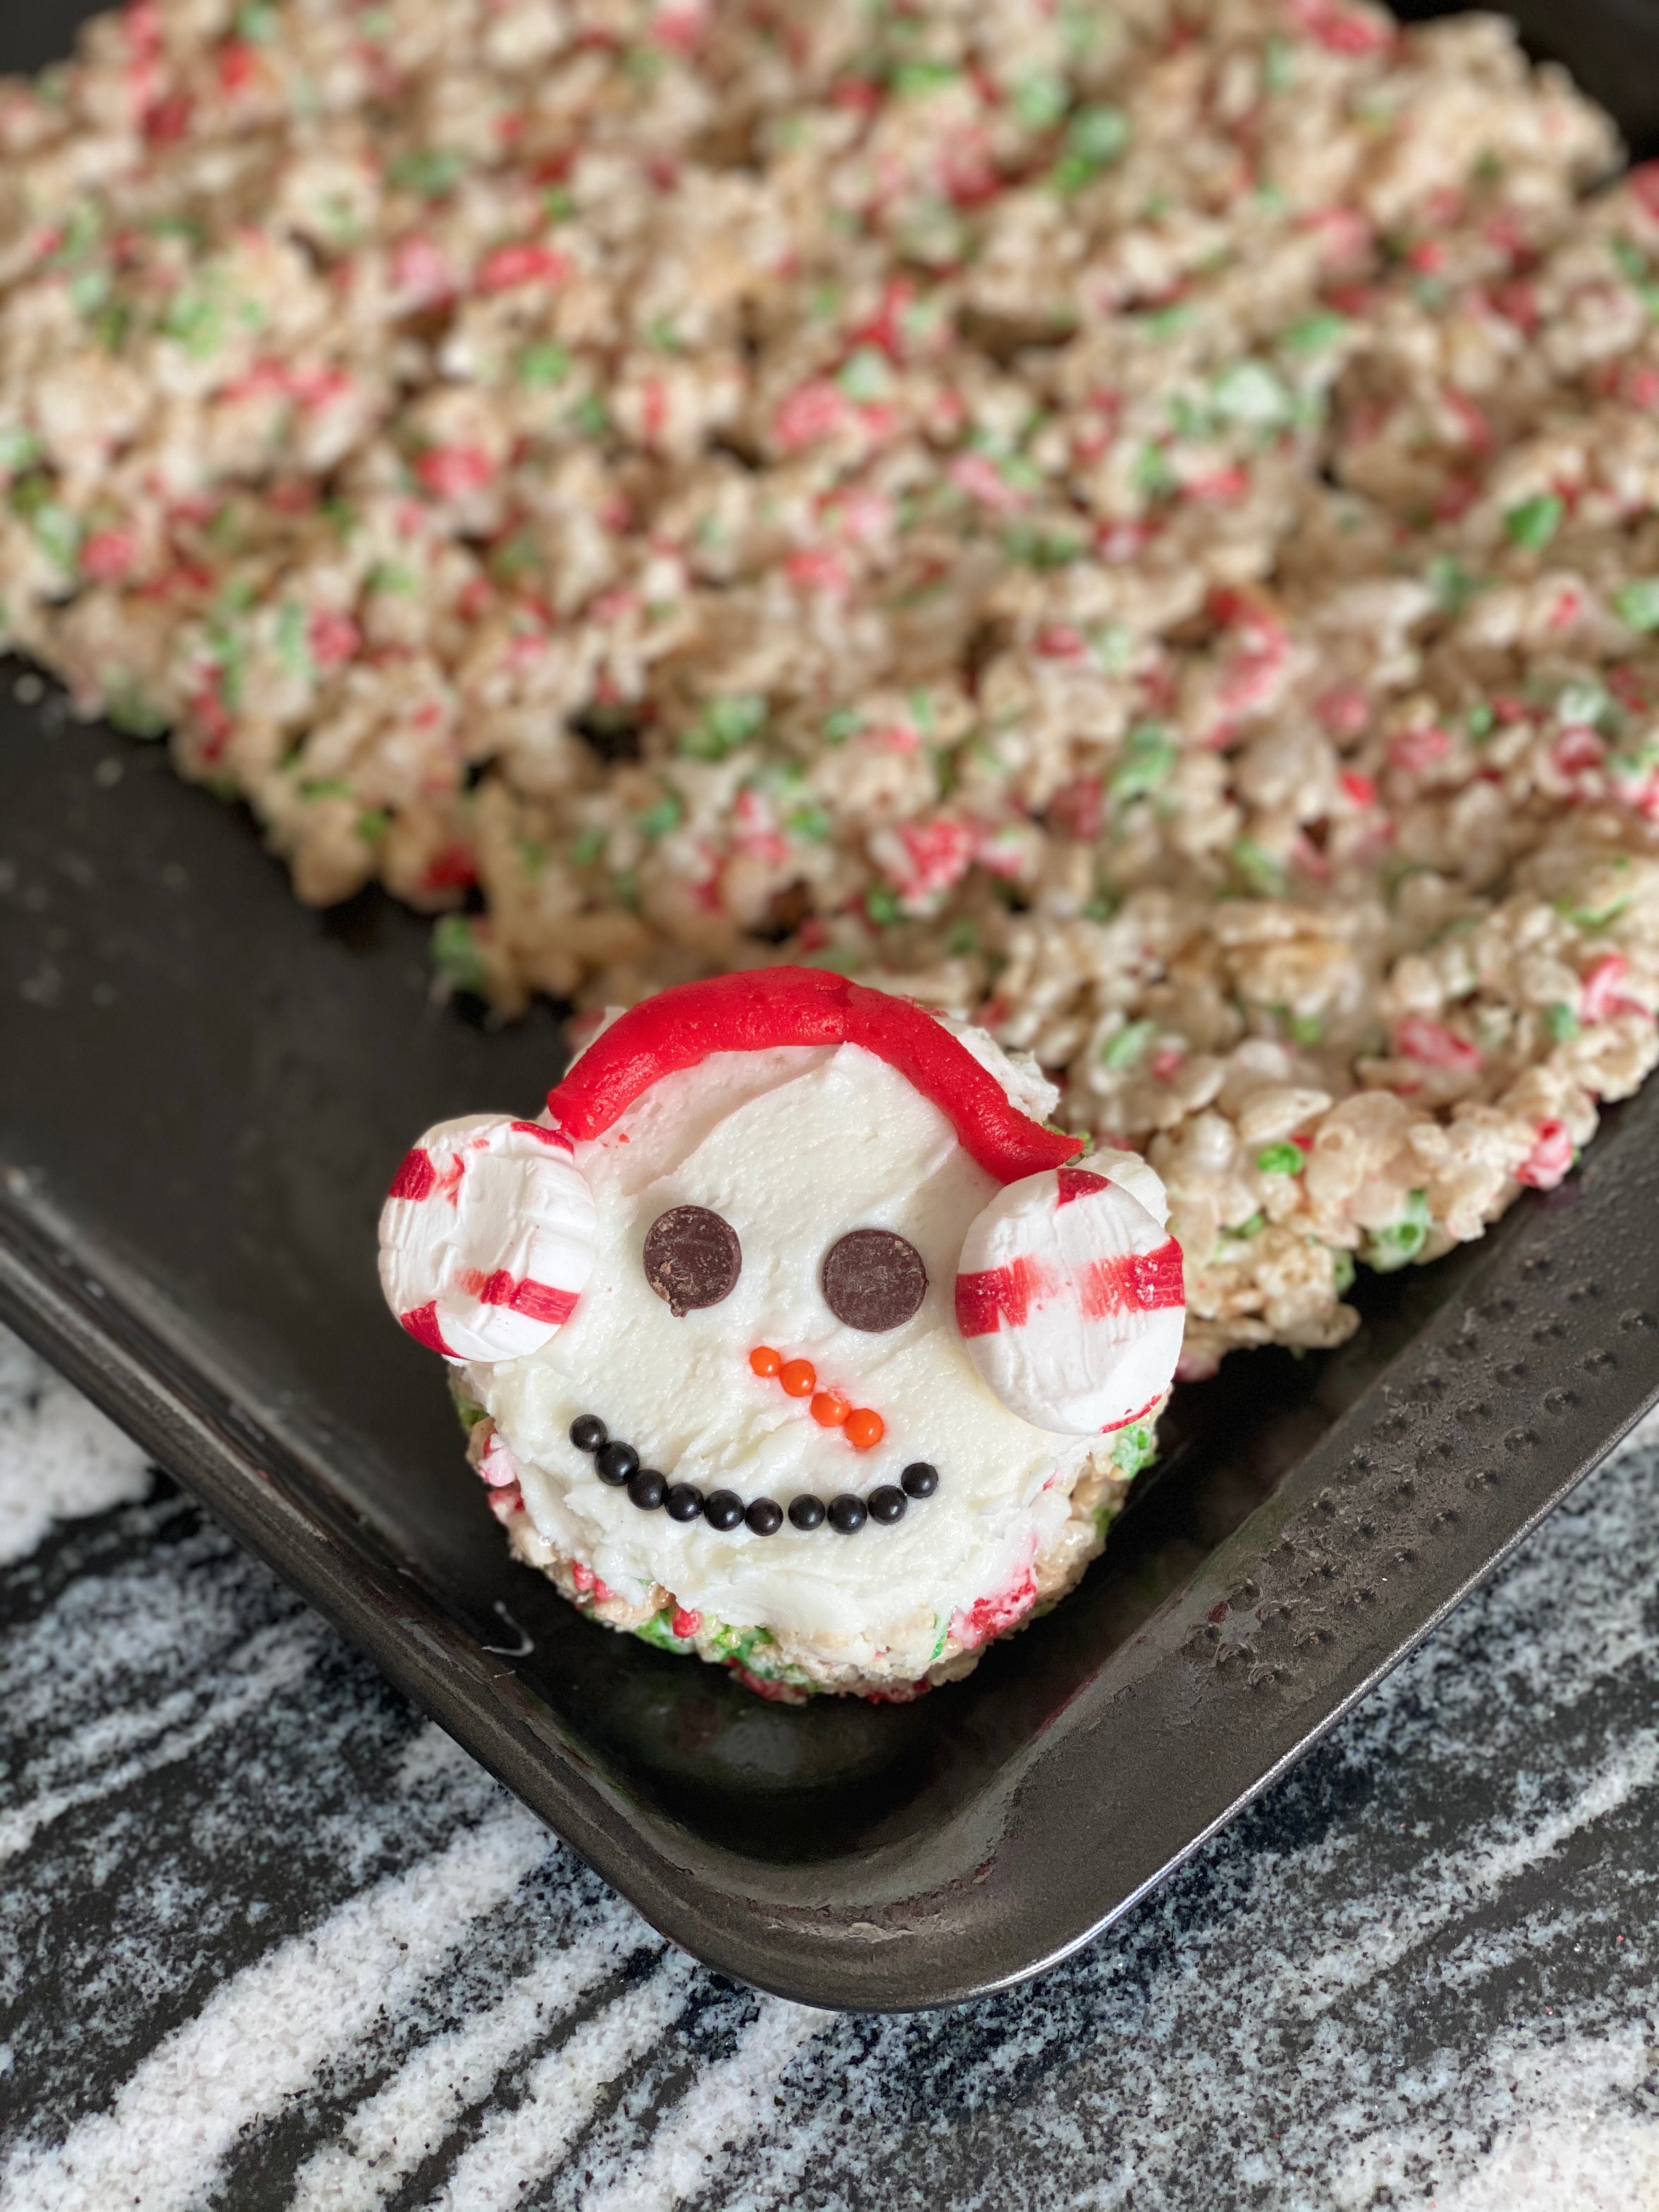 Snowman make a treat and take for kids